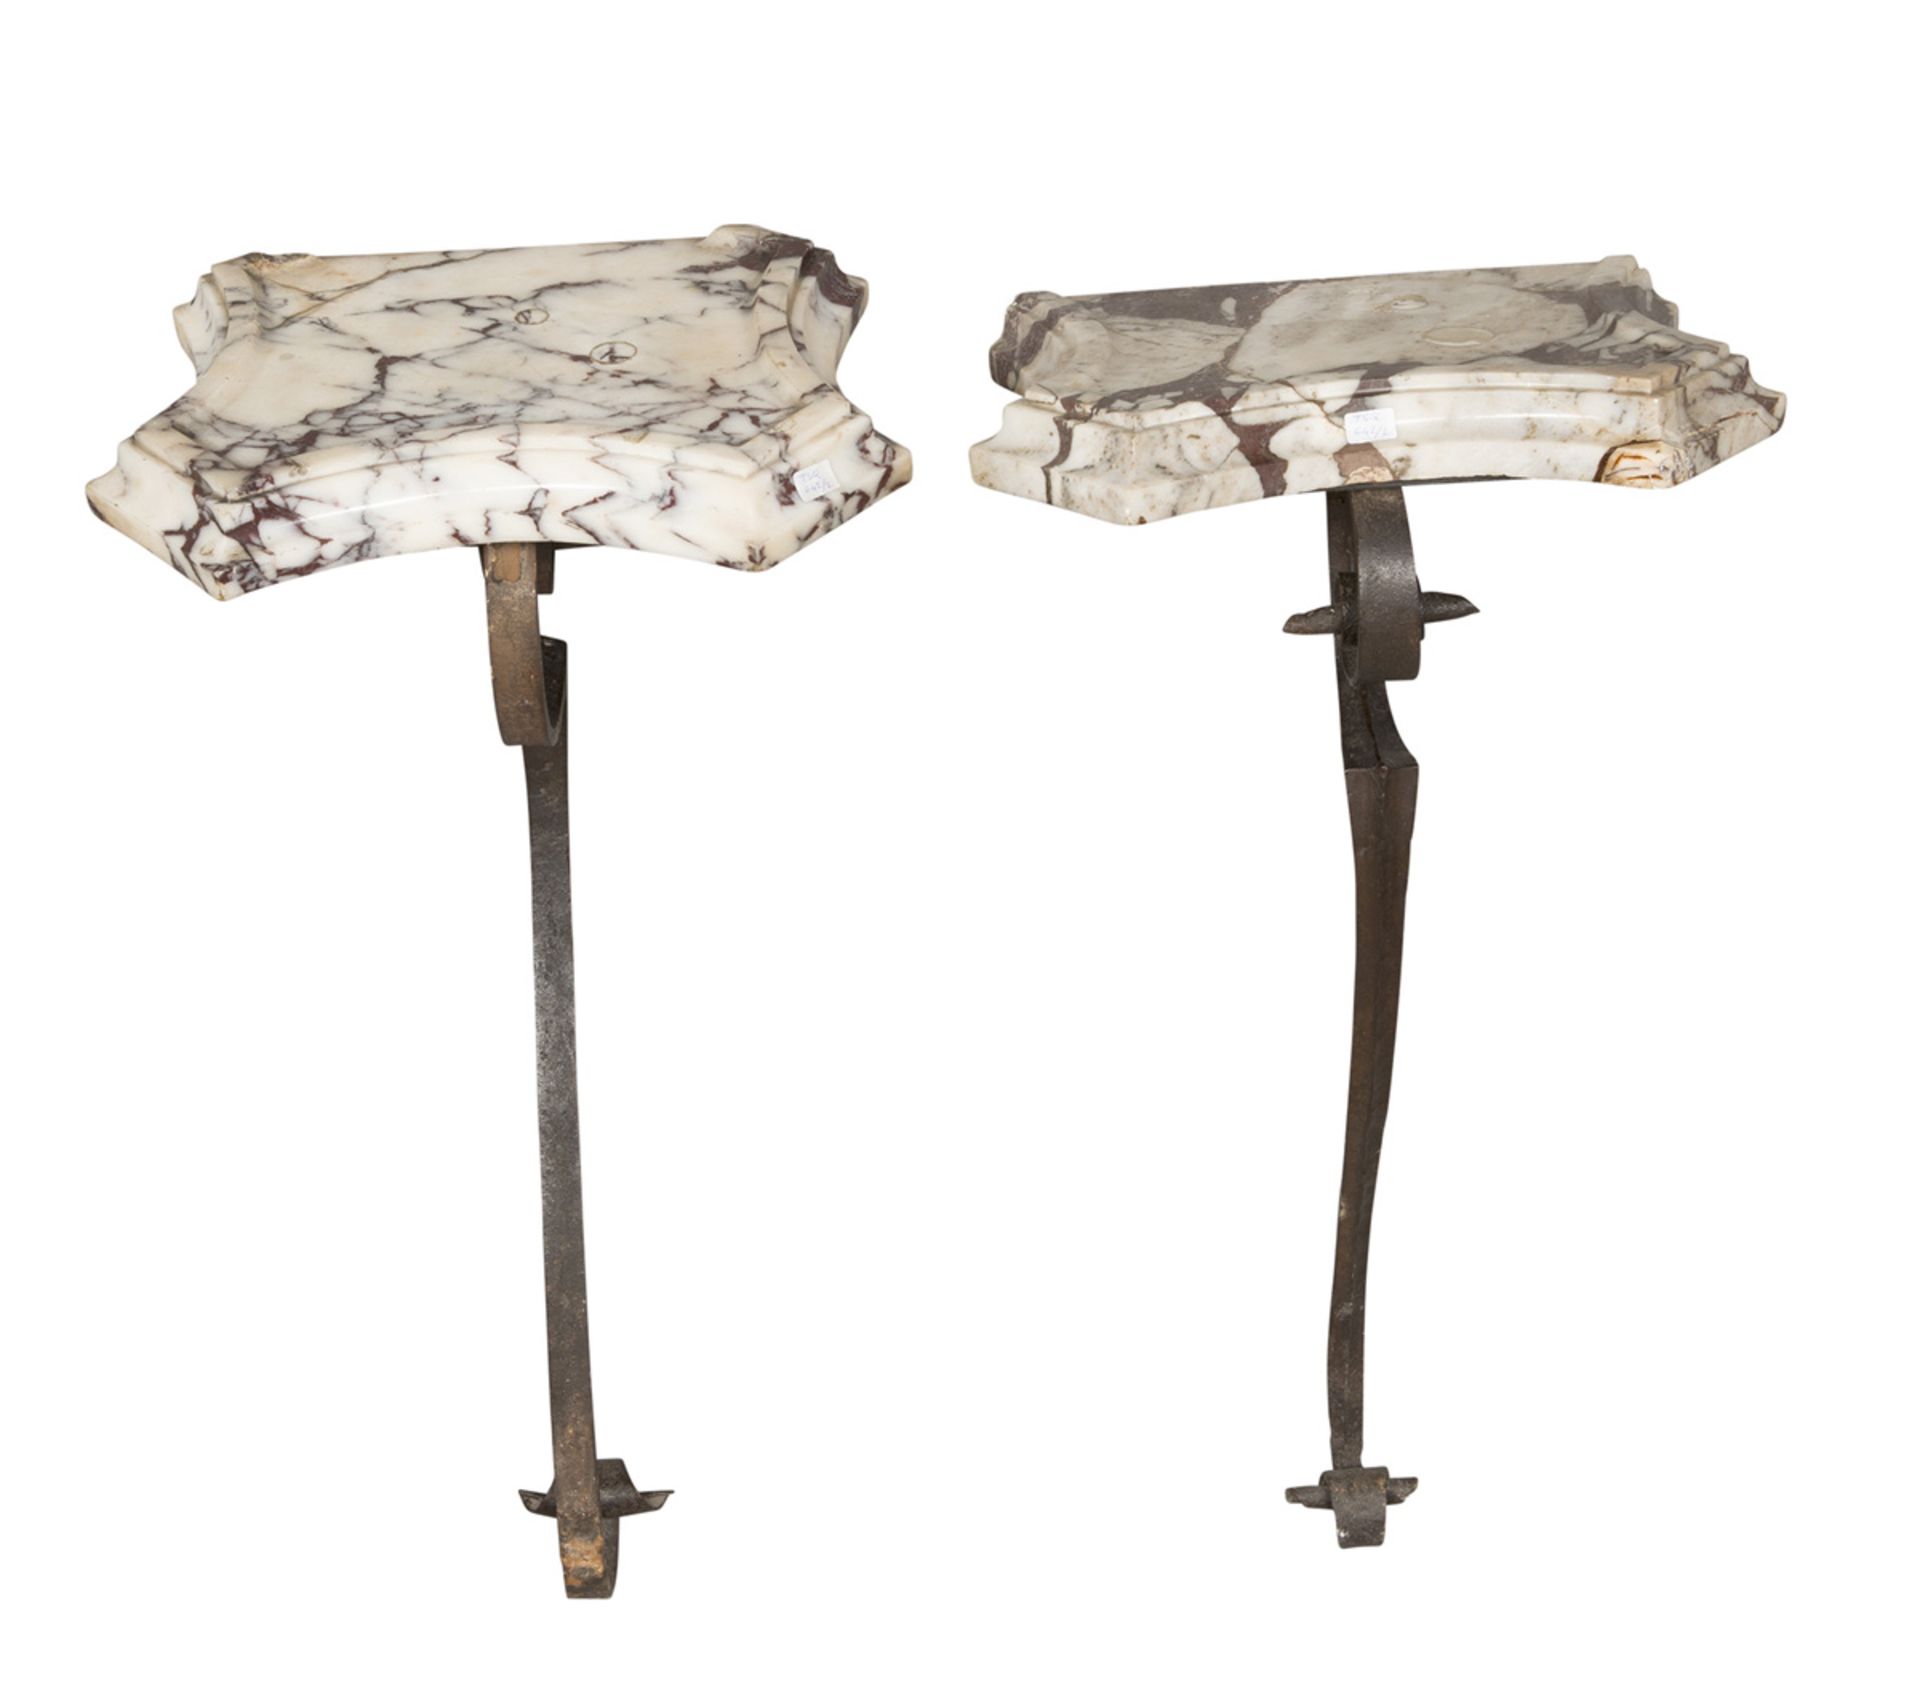 A PAIR OF SMALL CONSOLES IN IRON 18TH CENTURY